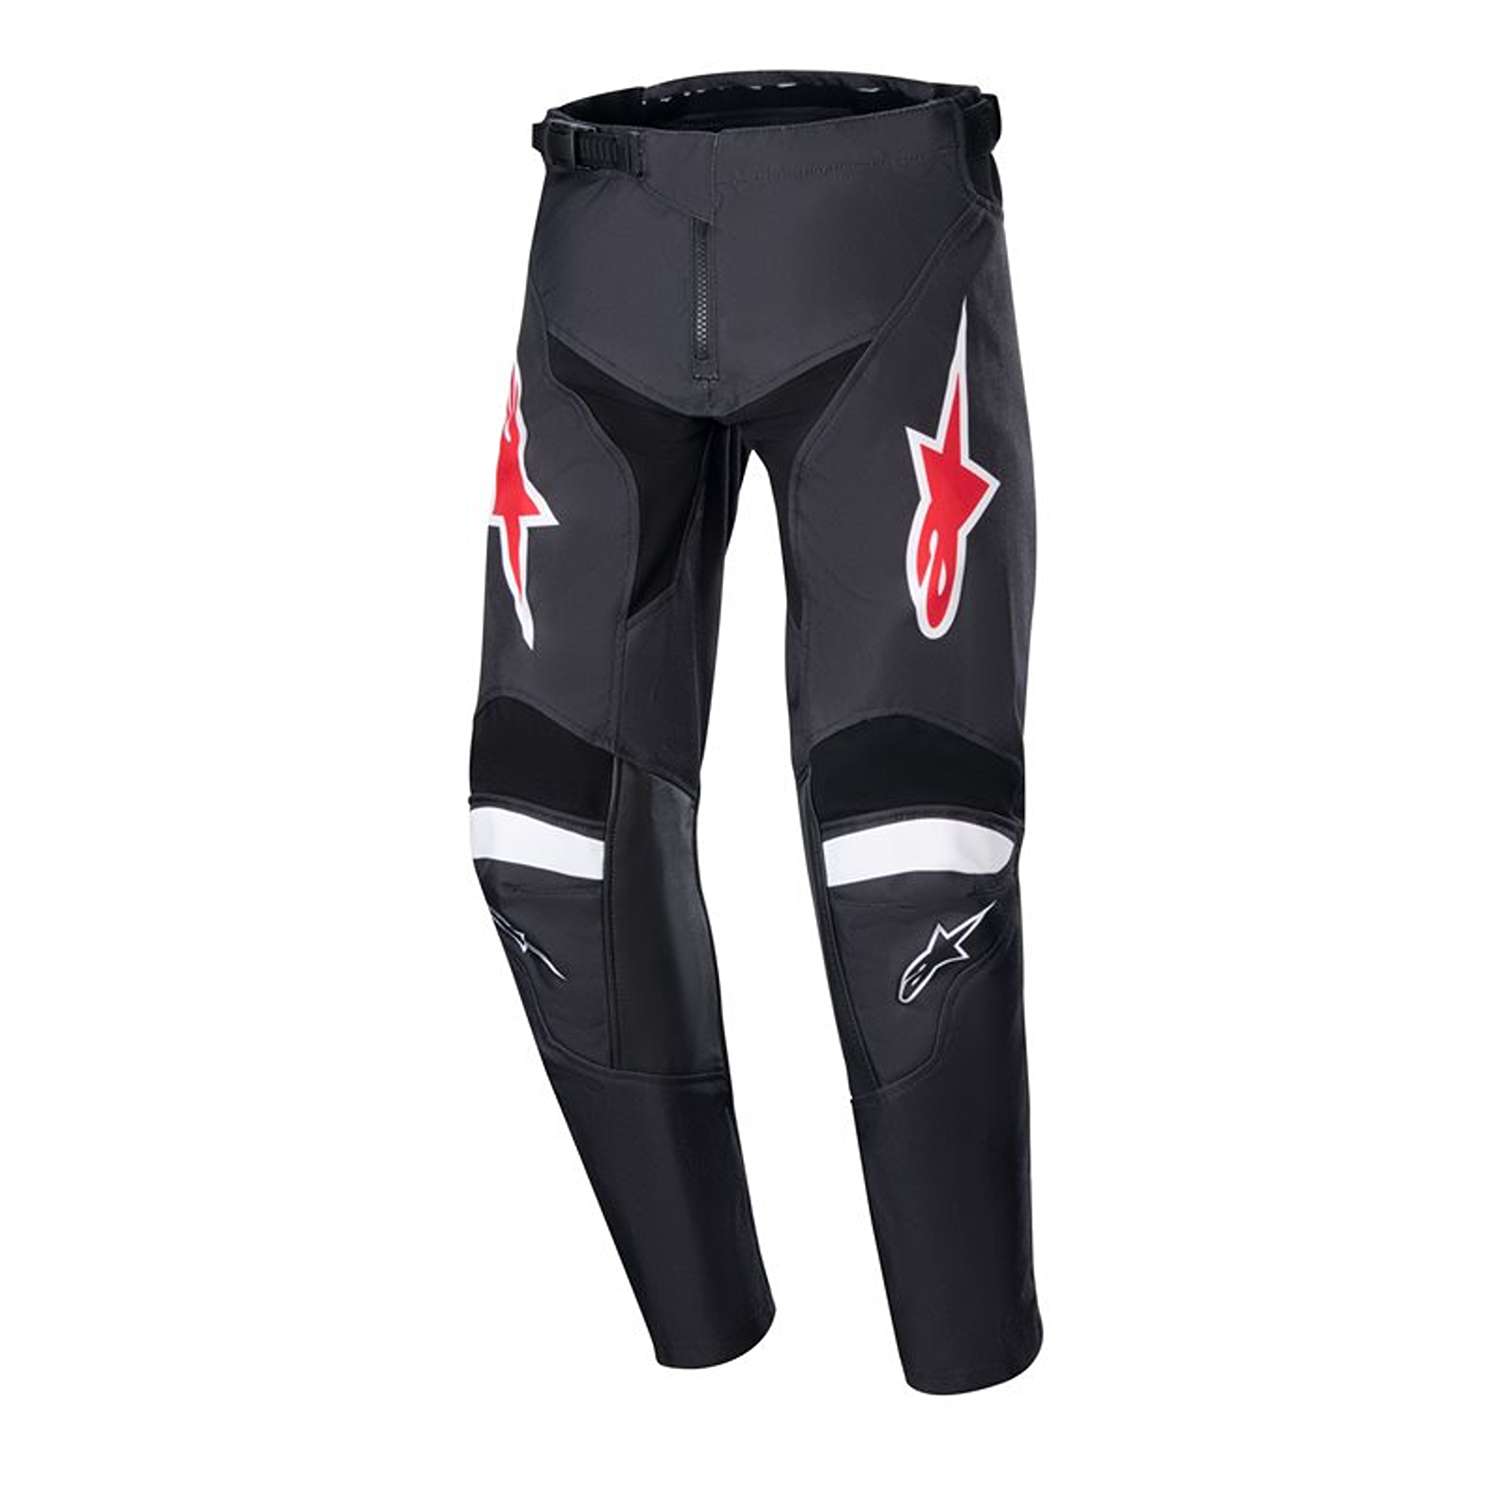 Image of Alpinestars Youth Racer Lucent Pants Black White Taille 24